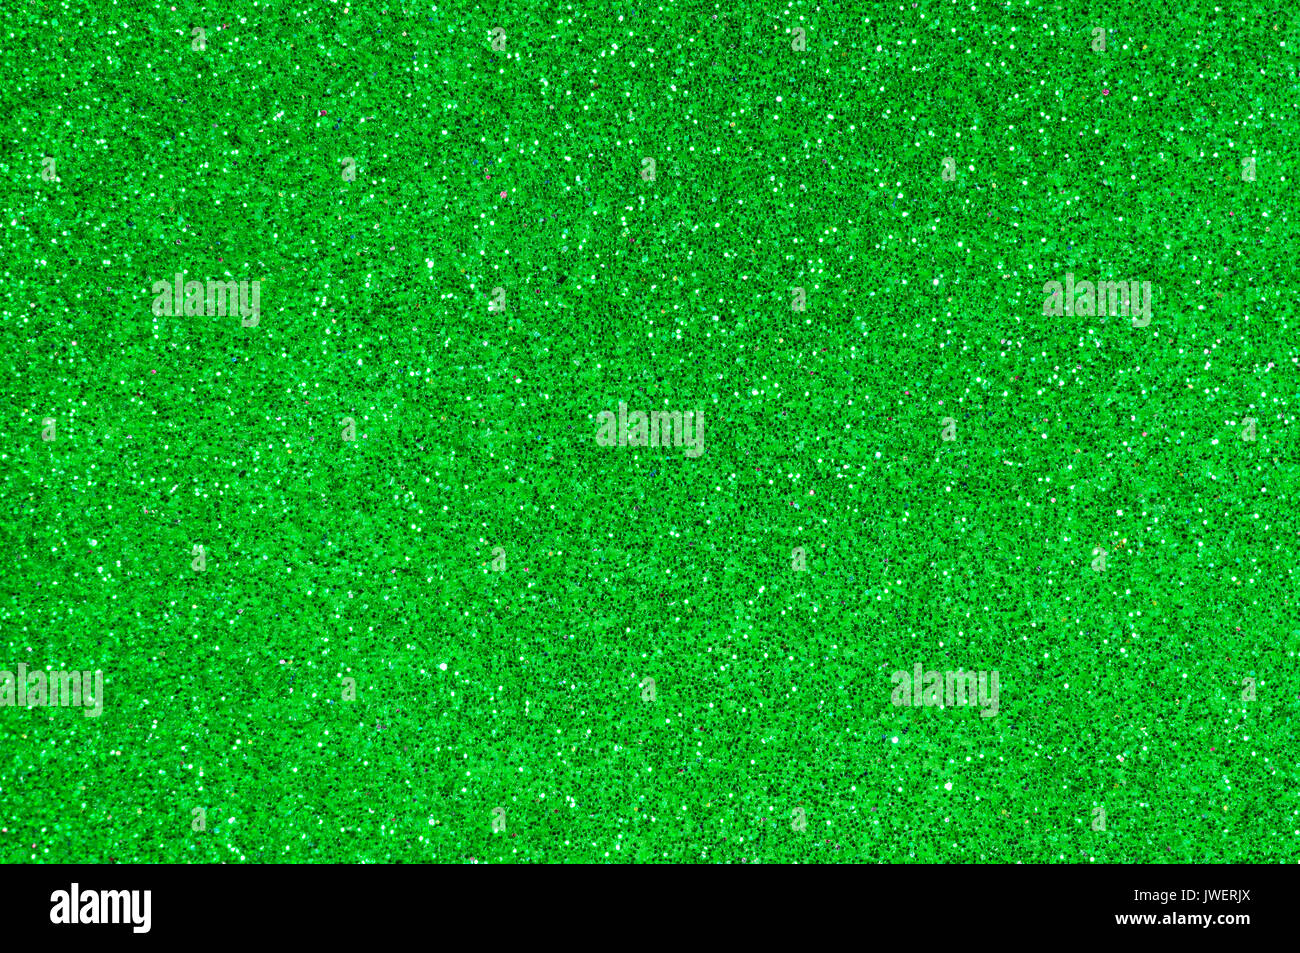 Sparkly Green Glitter Background Texture Stock Photo Alamy